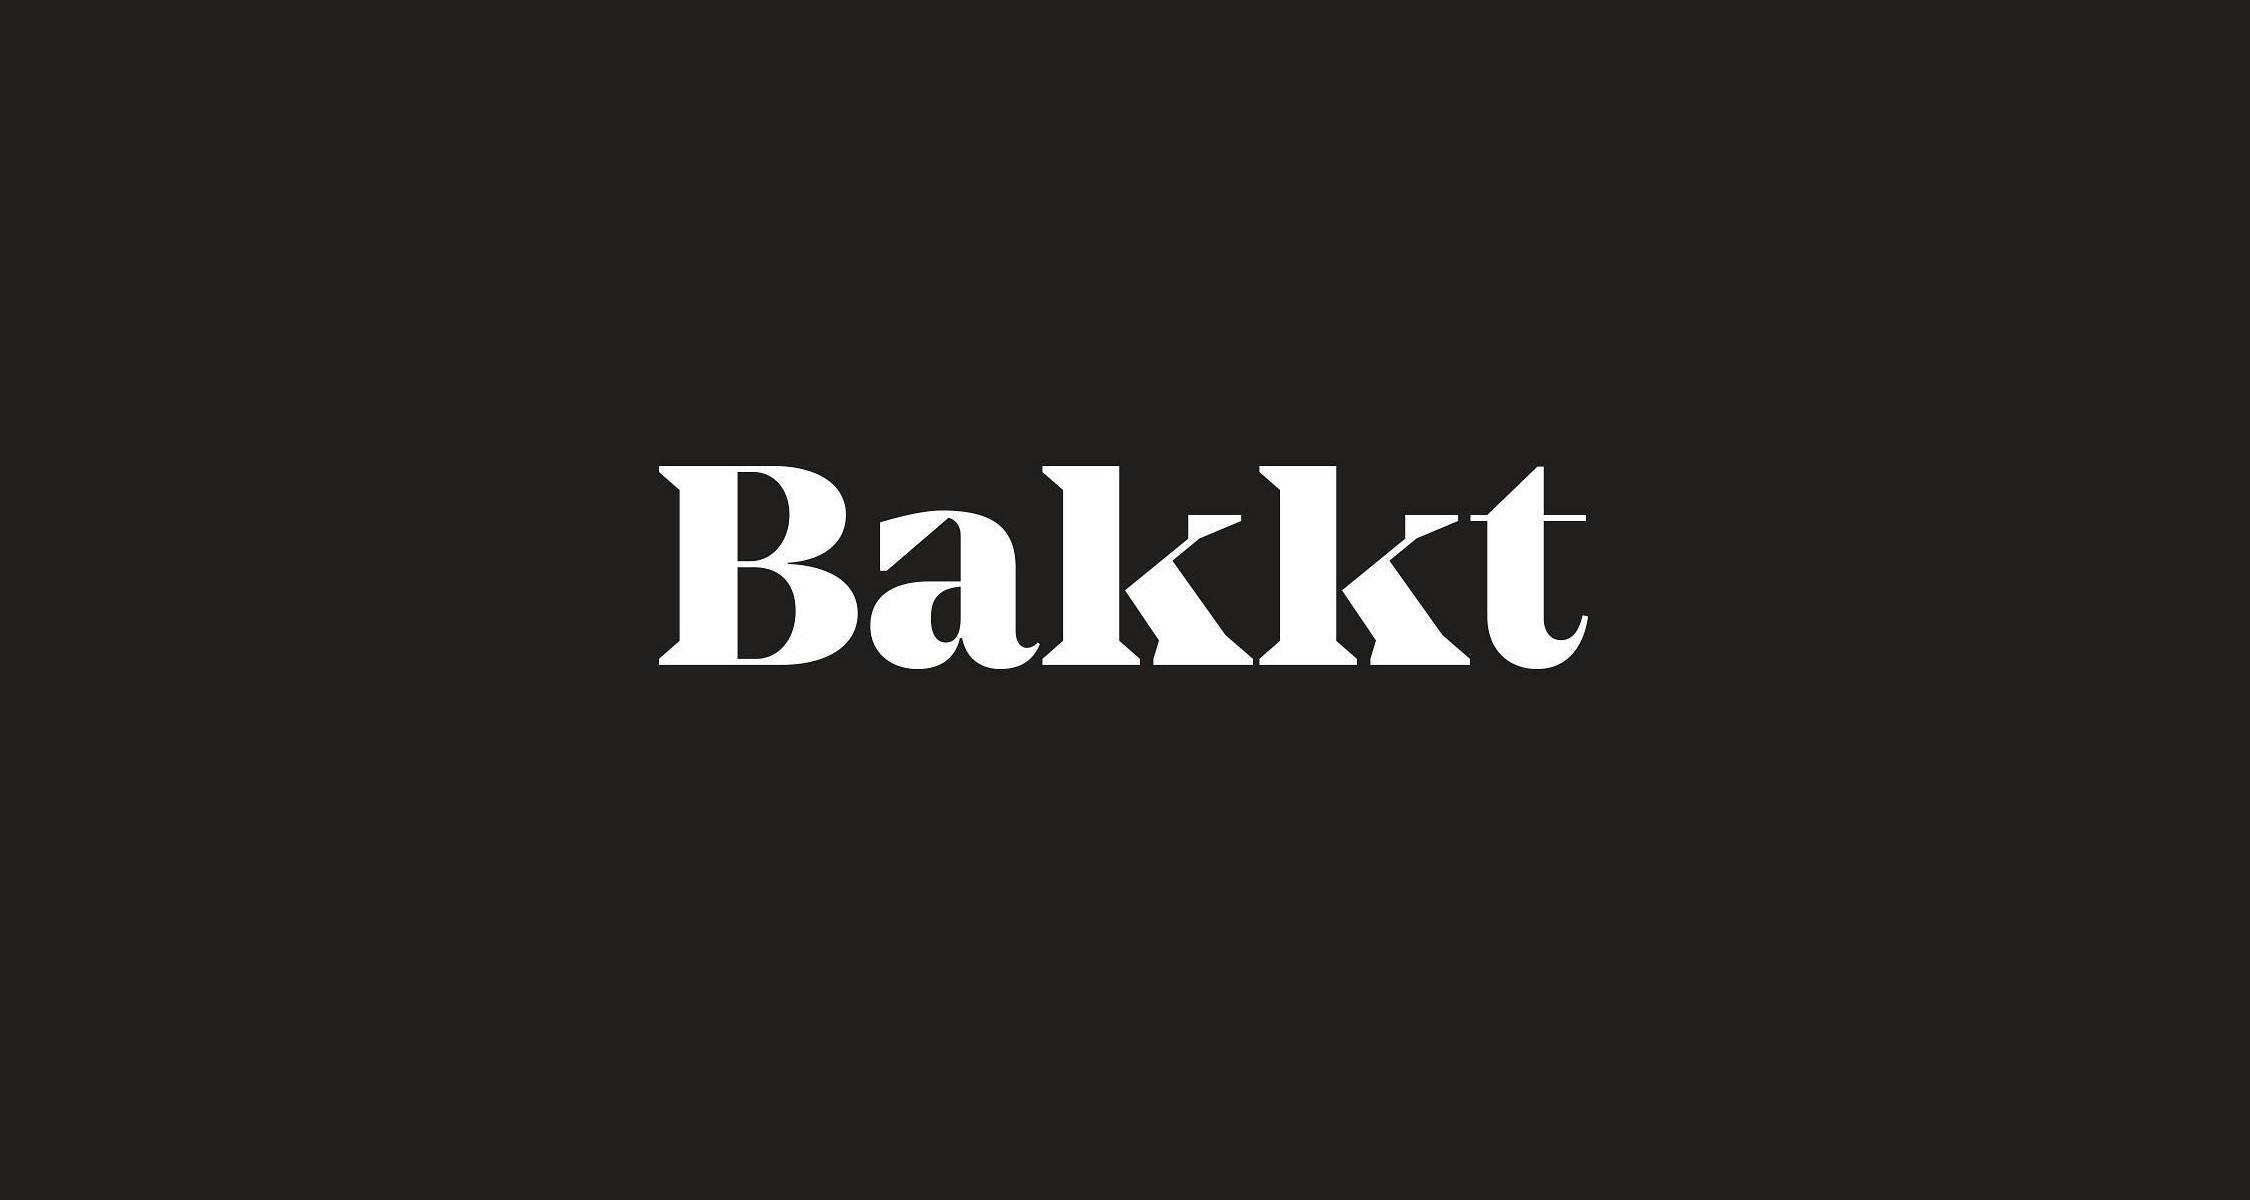 featured image - Bakkt: What Does it Mean for Bitcoin?